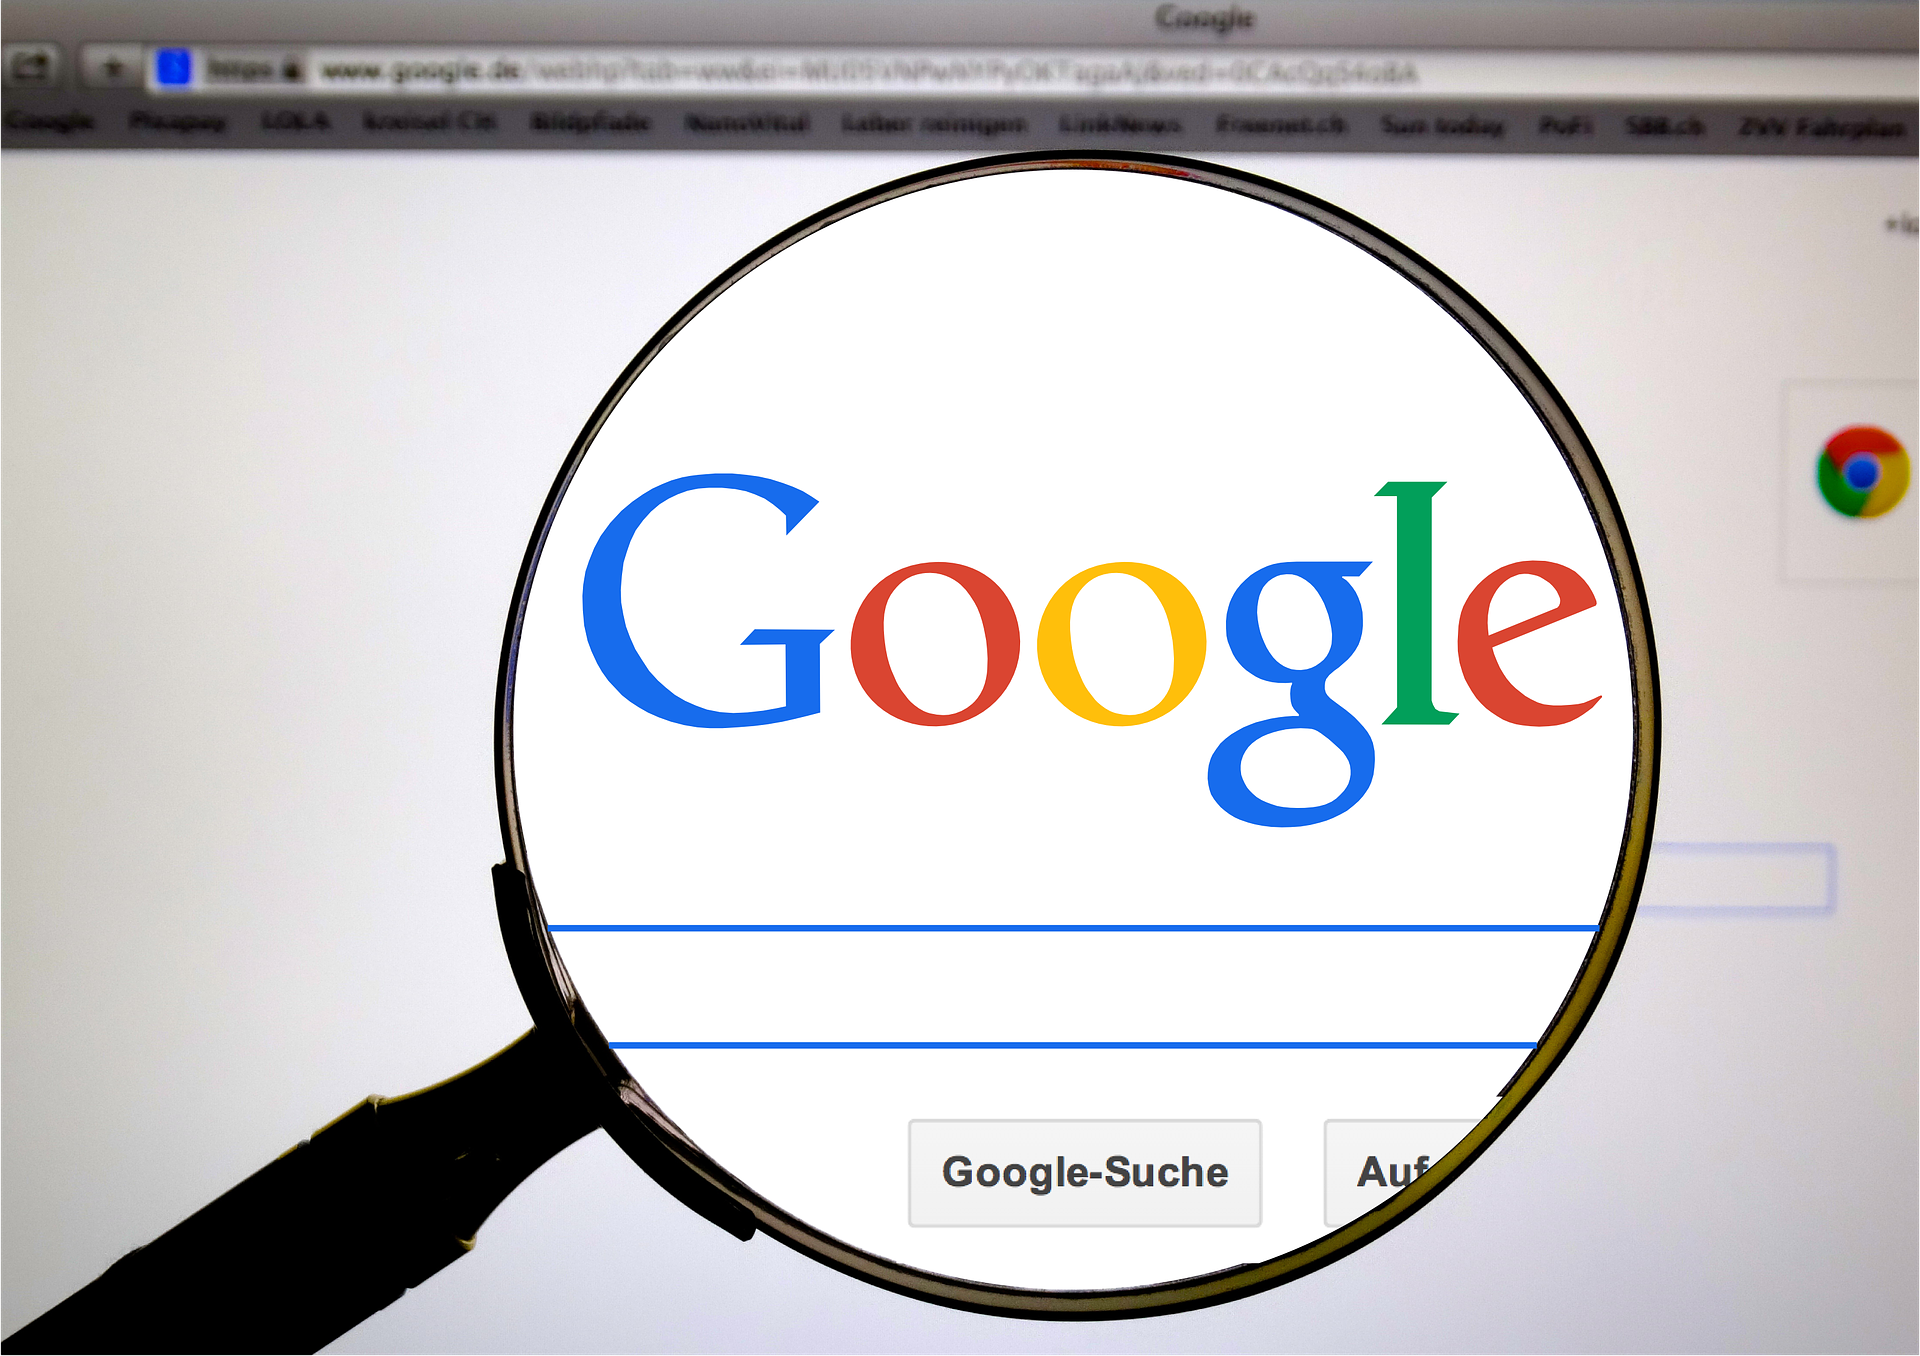 Google says core web vitals will become ranking signals for search engine very soon